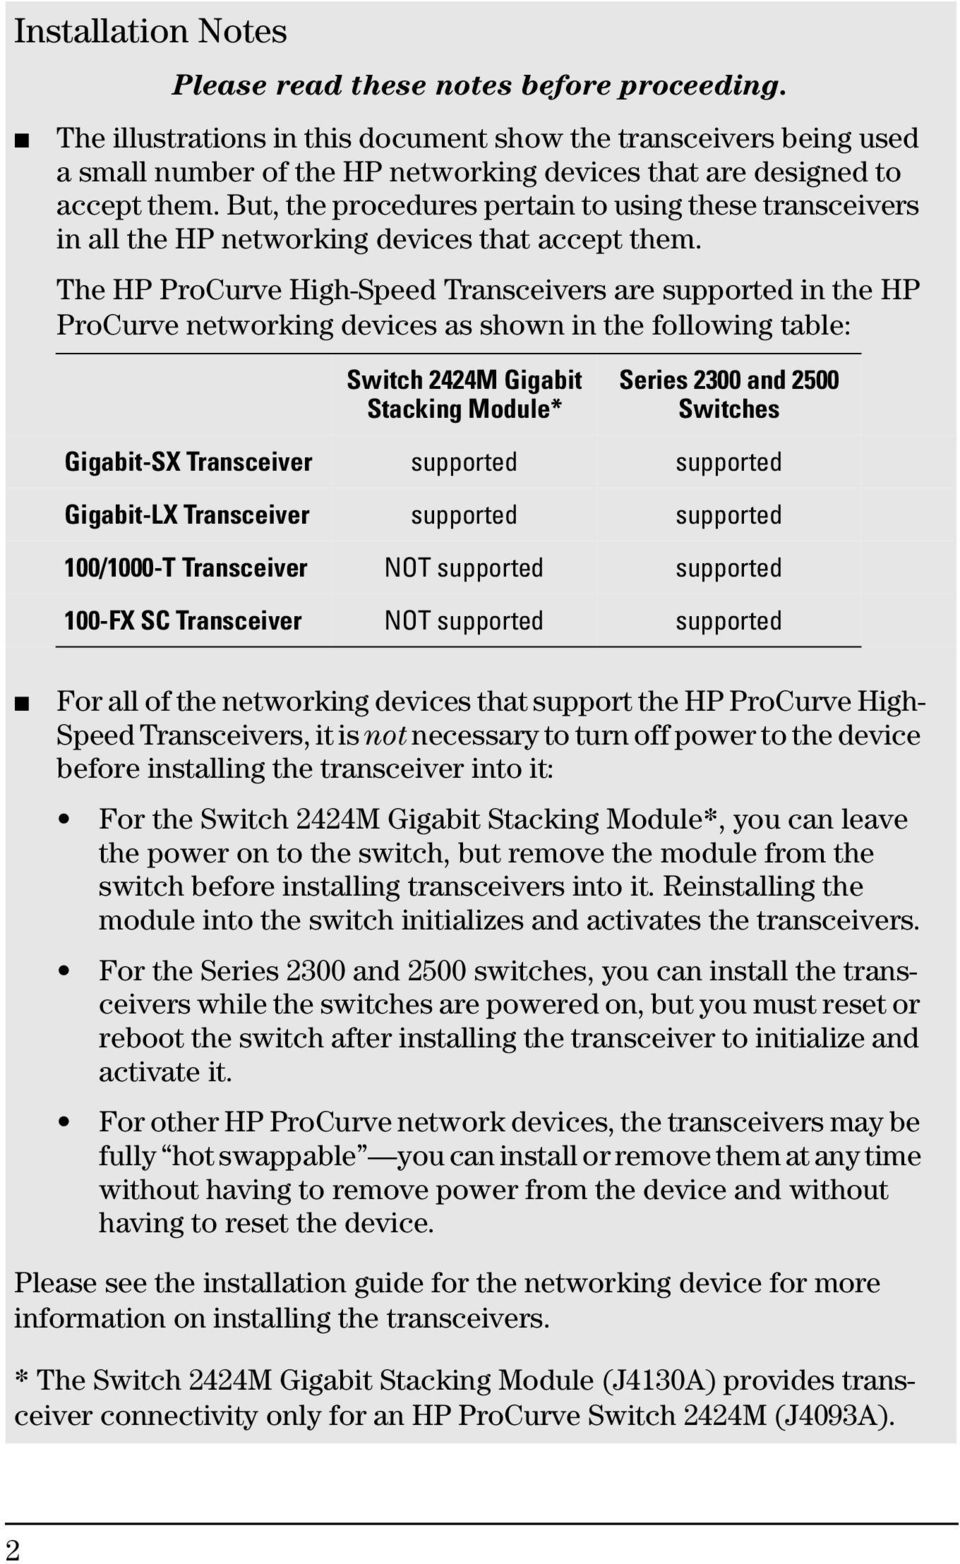 But, the procedures pertain to using these transceivers in all the HP networking devices that accept them.